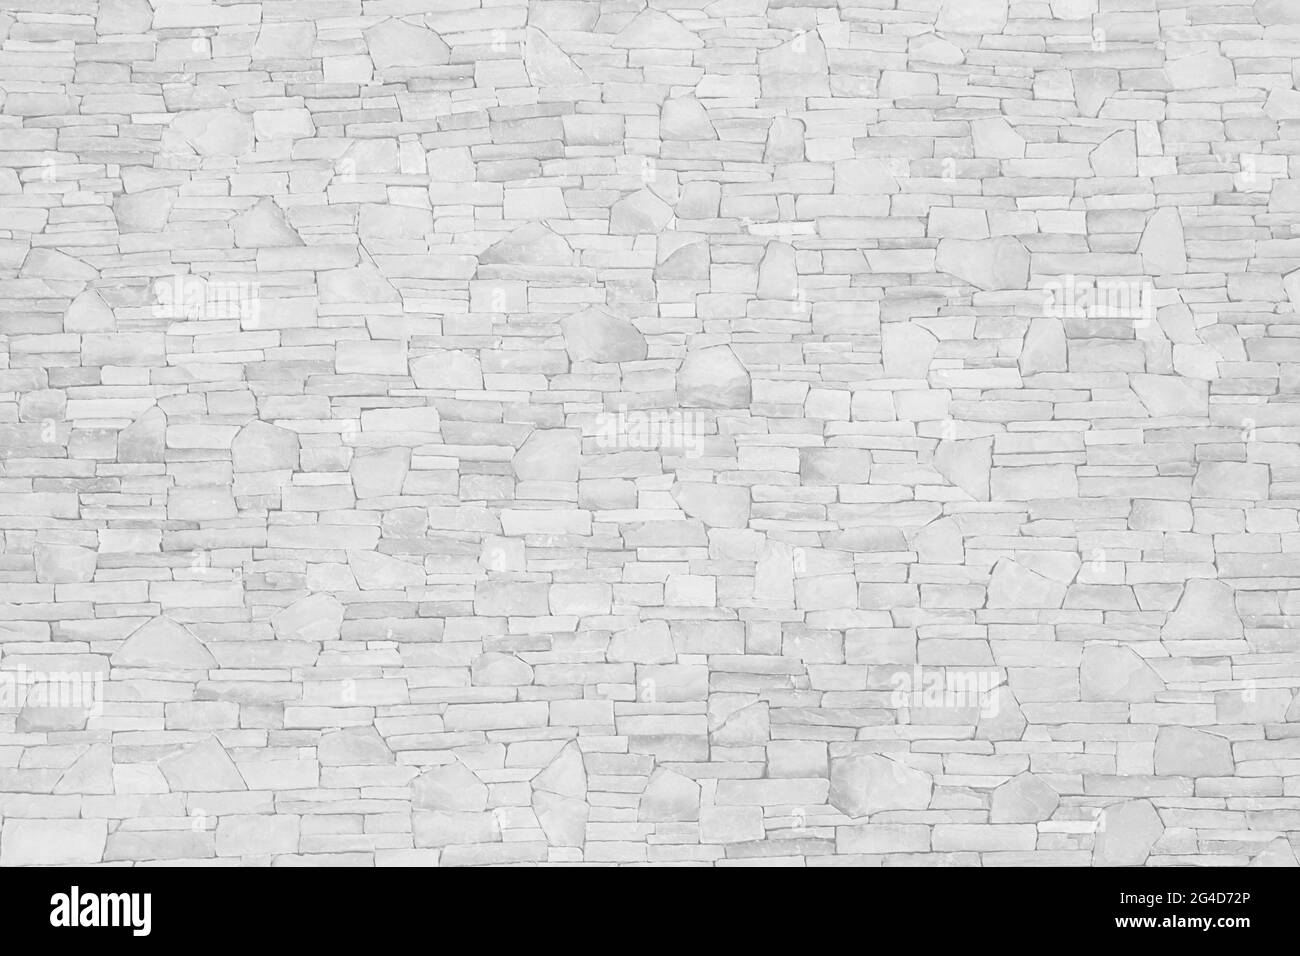 White gray brick wall as a background or texture. Stock Photo